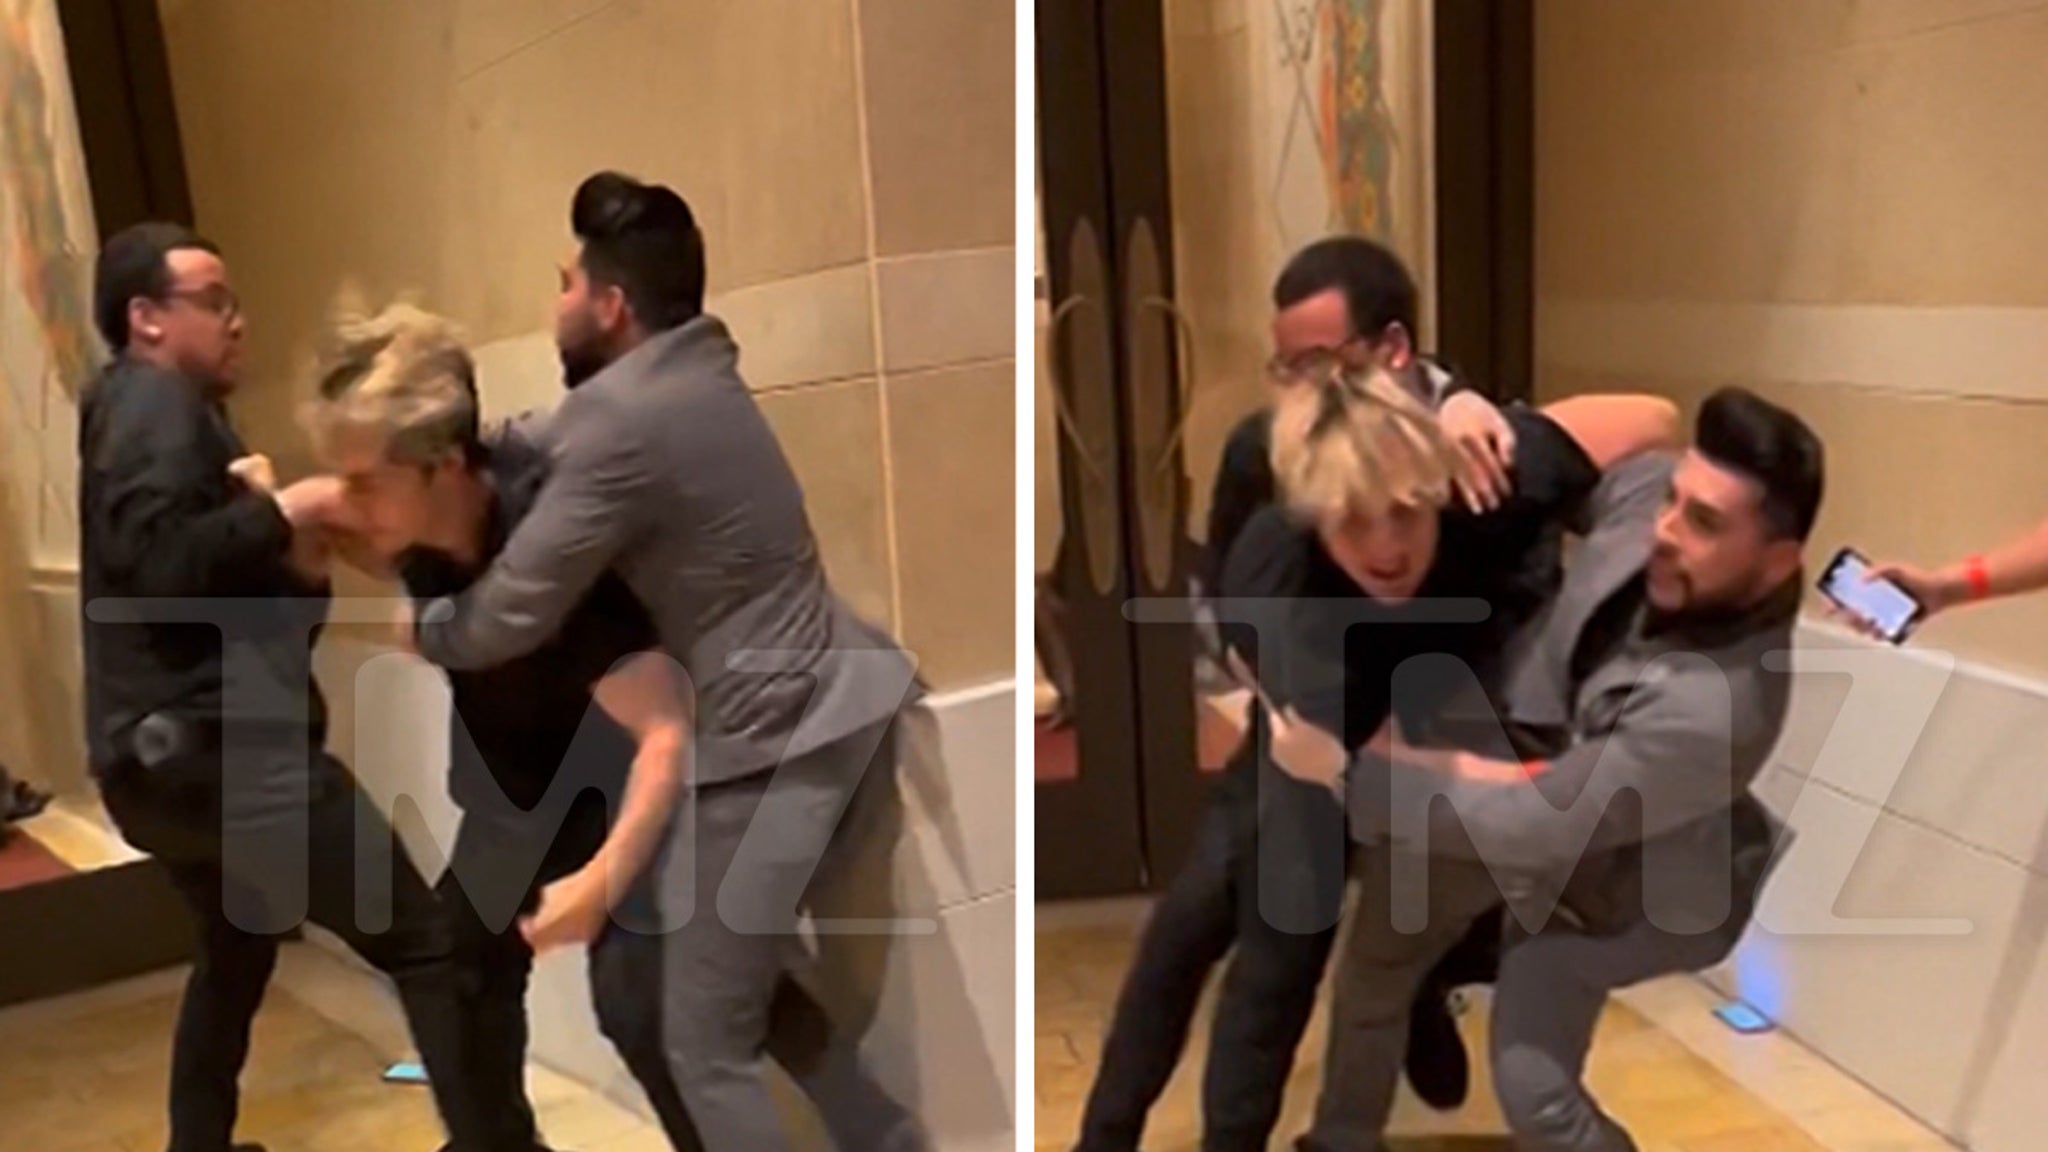 TikTok Star Bryce Hall Hits Vegas Security Guard On Video, Busted For Drums